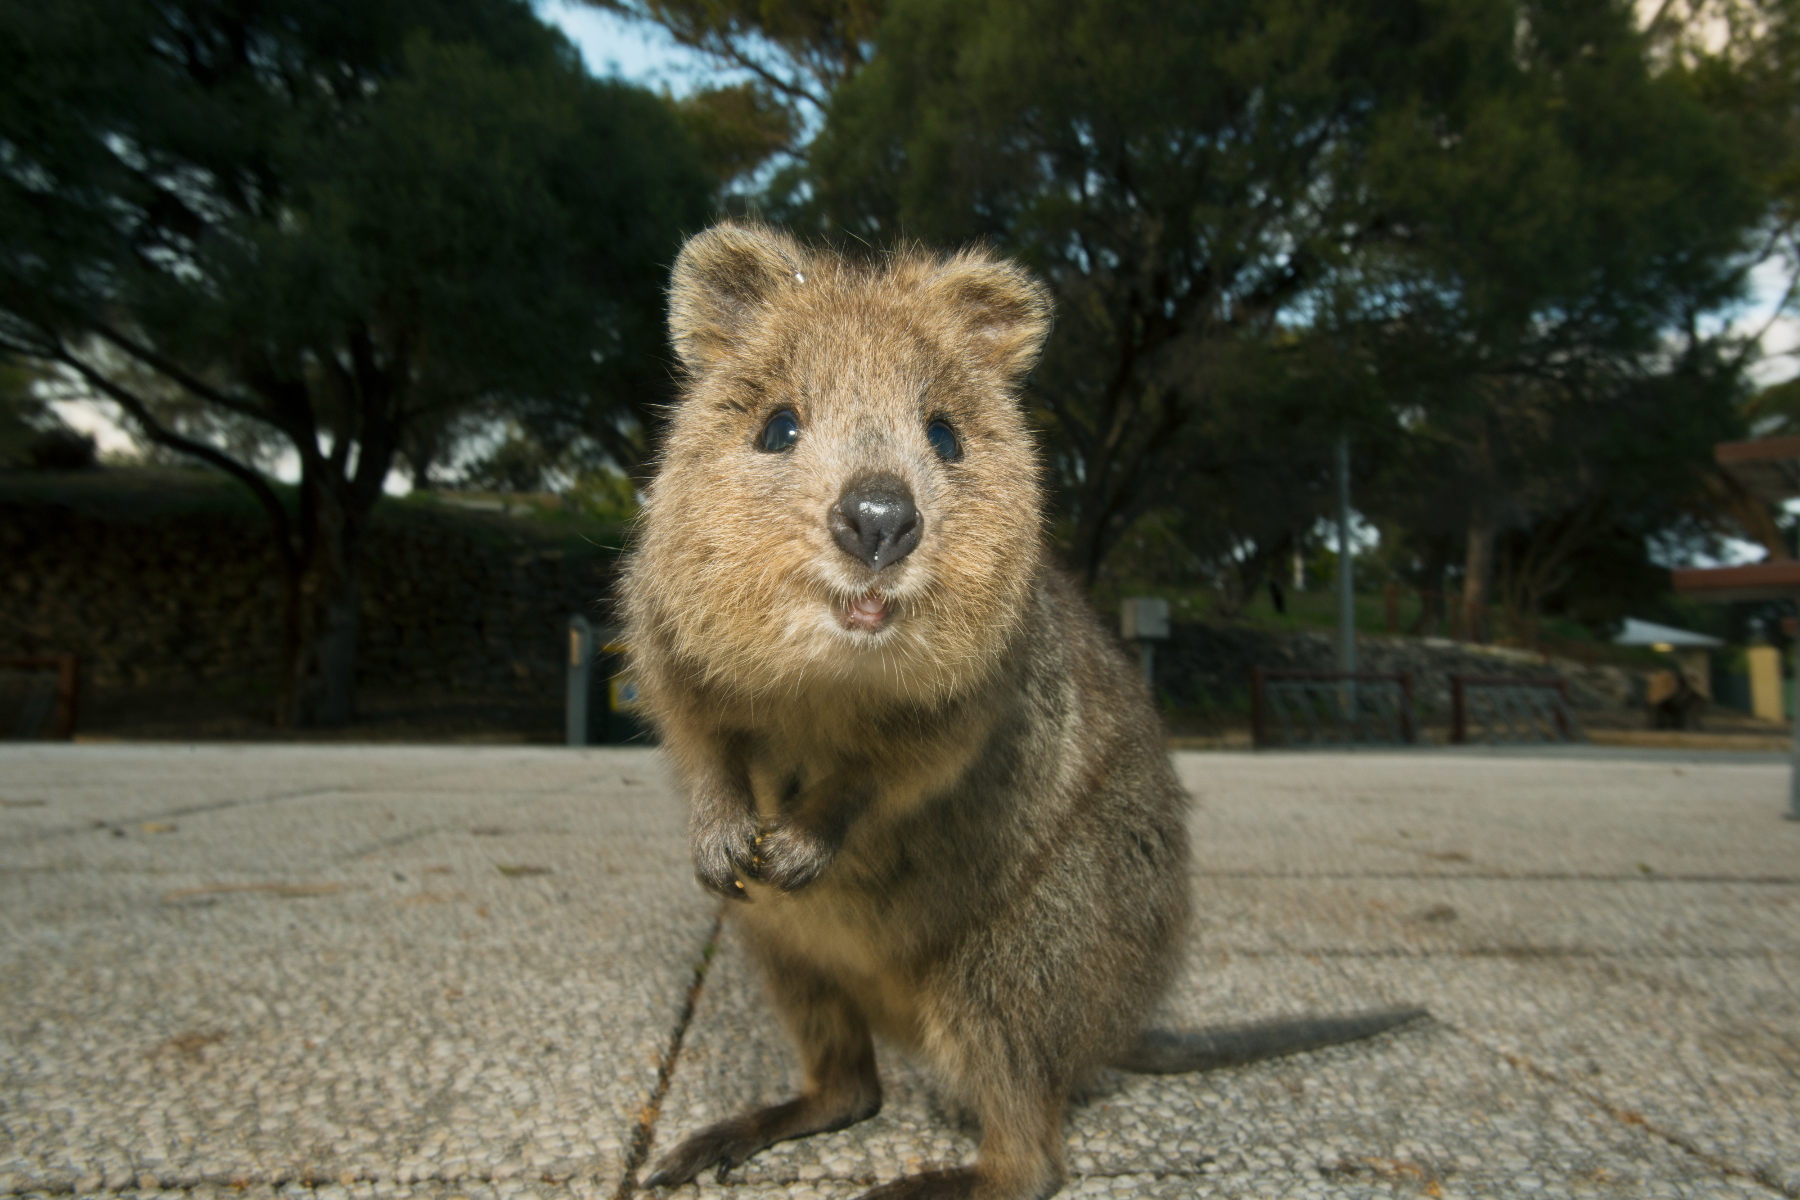 Quokka is standing next to a tree vegetation